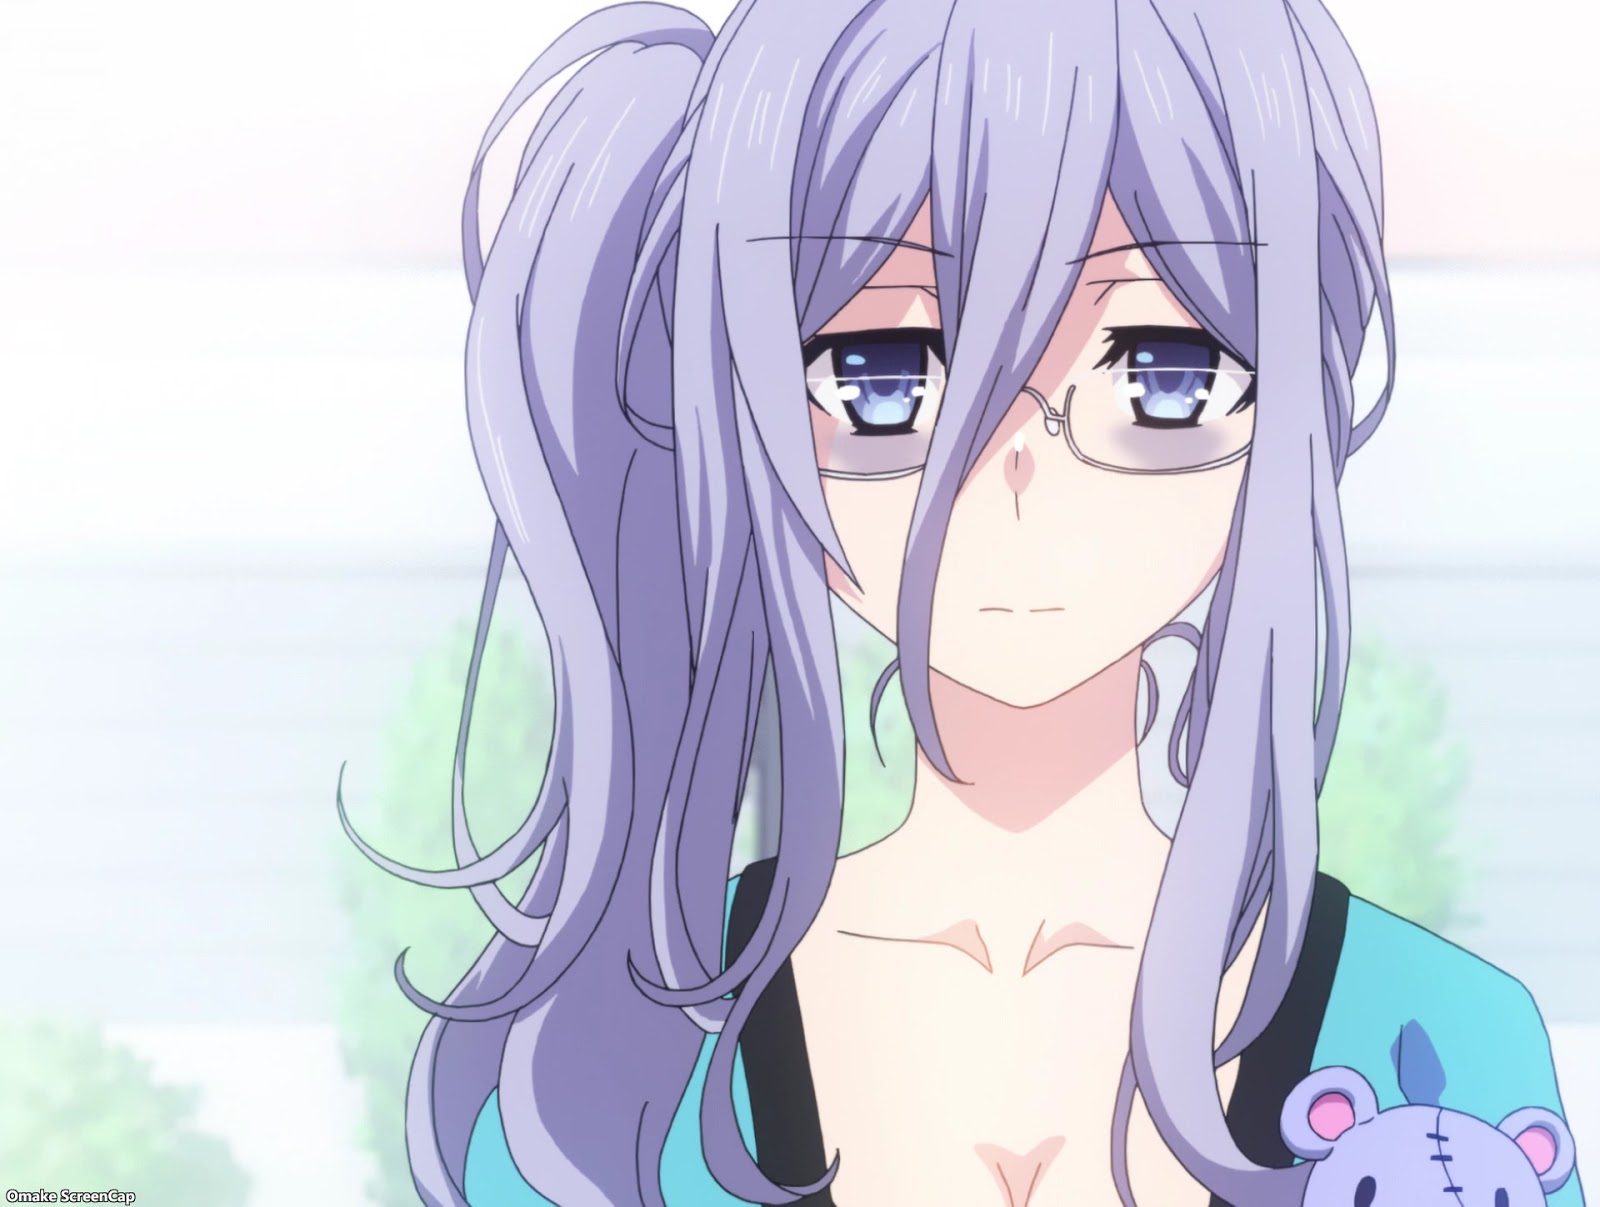 Joeschmo's Gears and Grounds: Date a Live IV - Episode 5 - Cinderella  Natsumi Looks Up